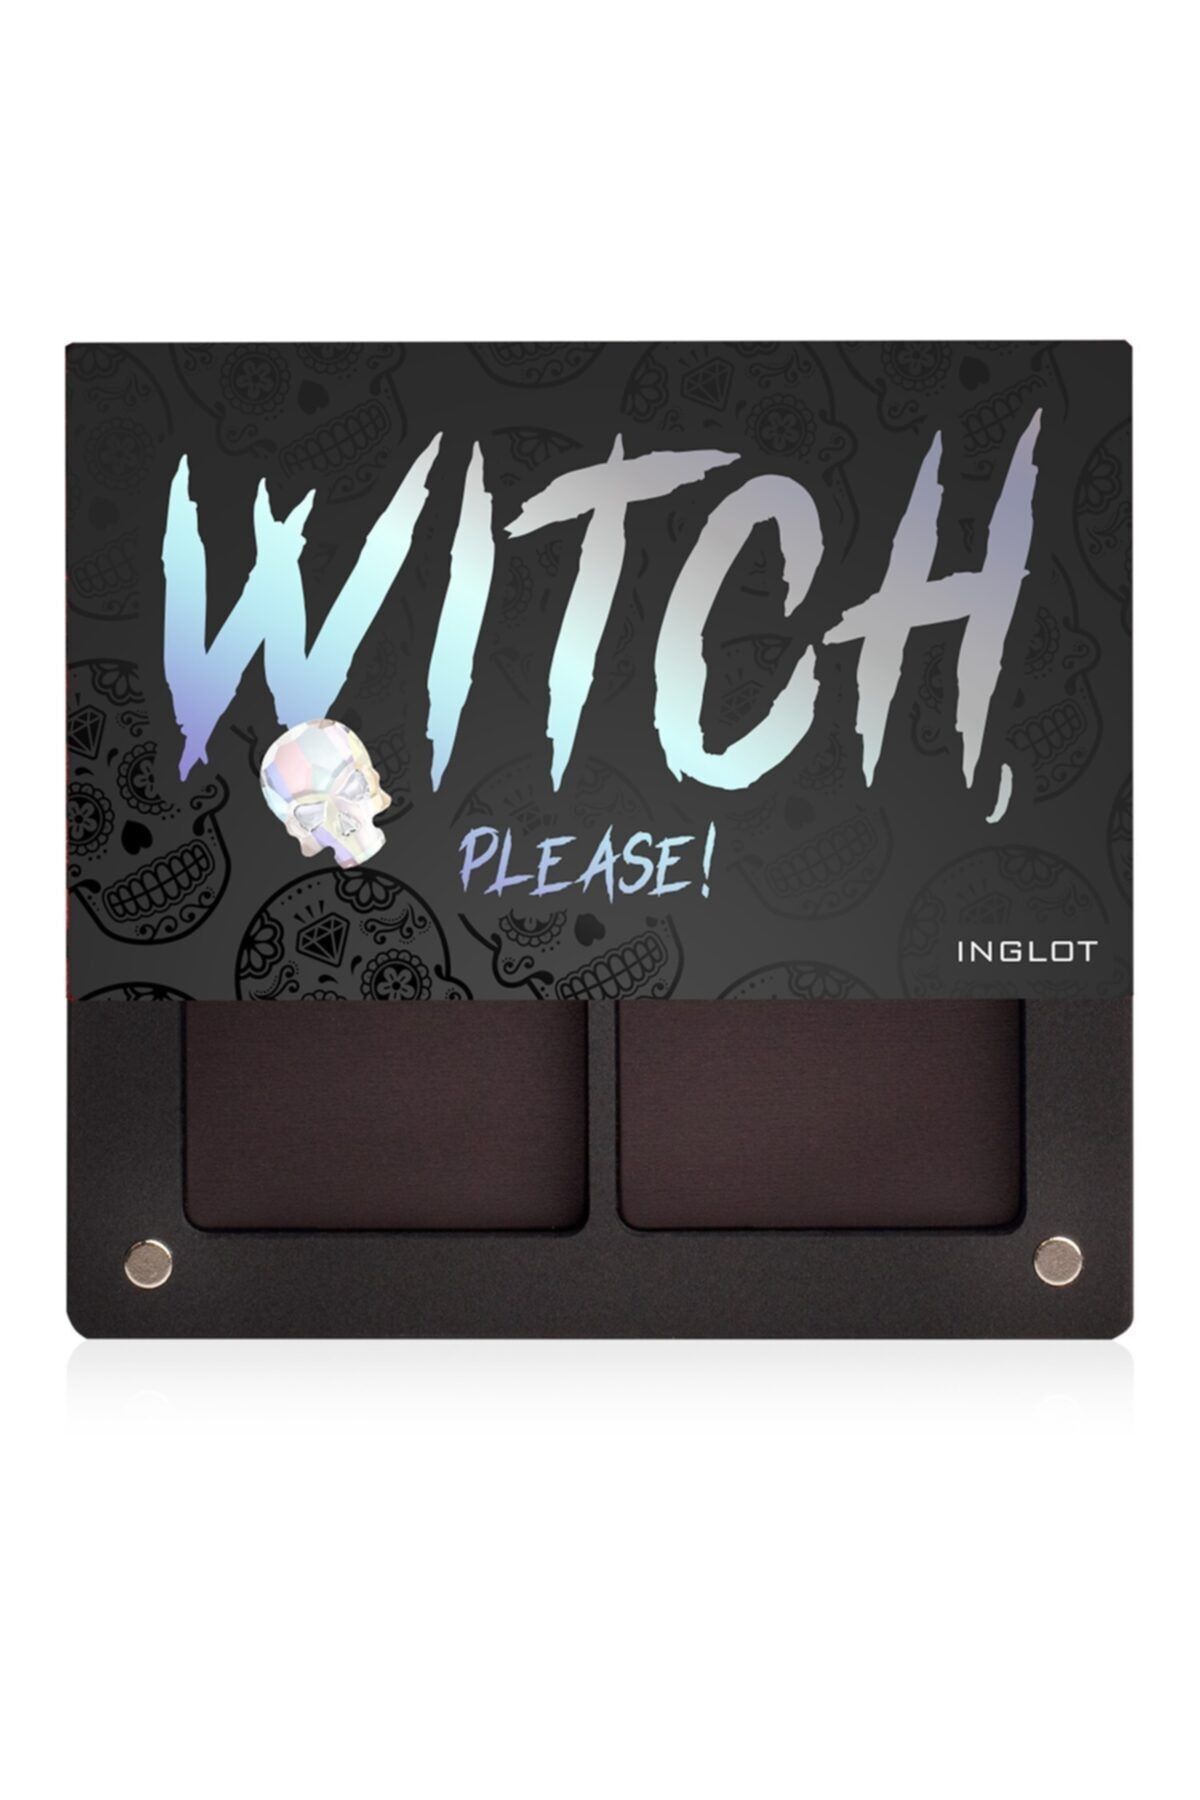 Inglot Freedom System Palette Witch, Please!